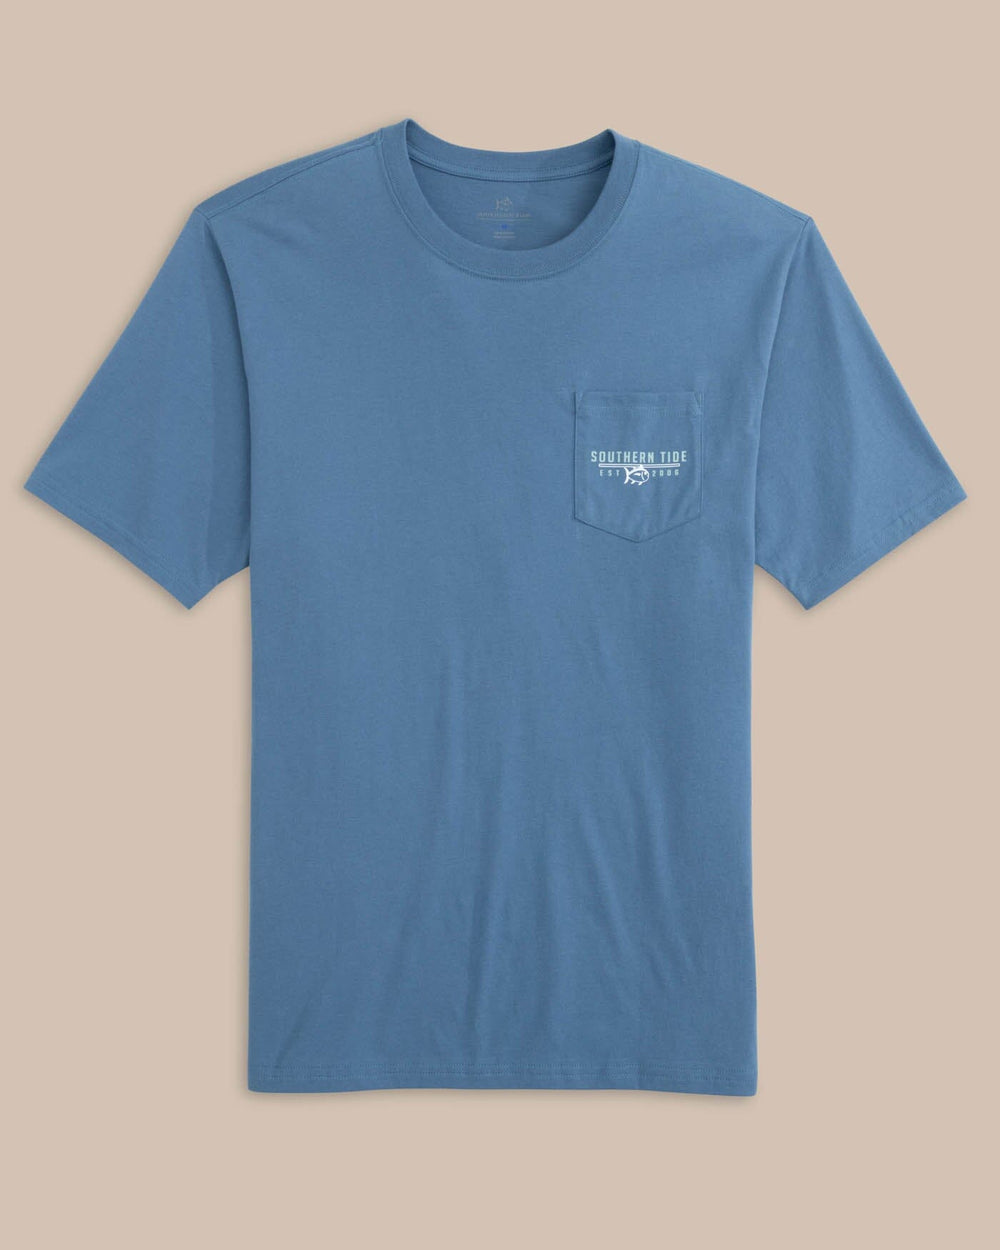 The front view of the Southern Tide Skipjack Beach Surf Club Short Sleeve T-Shirt by Southern Tide - Coronet Blue